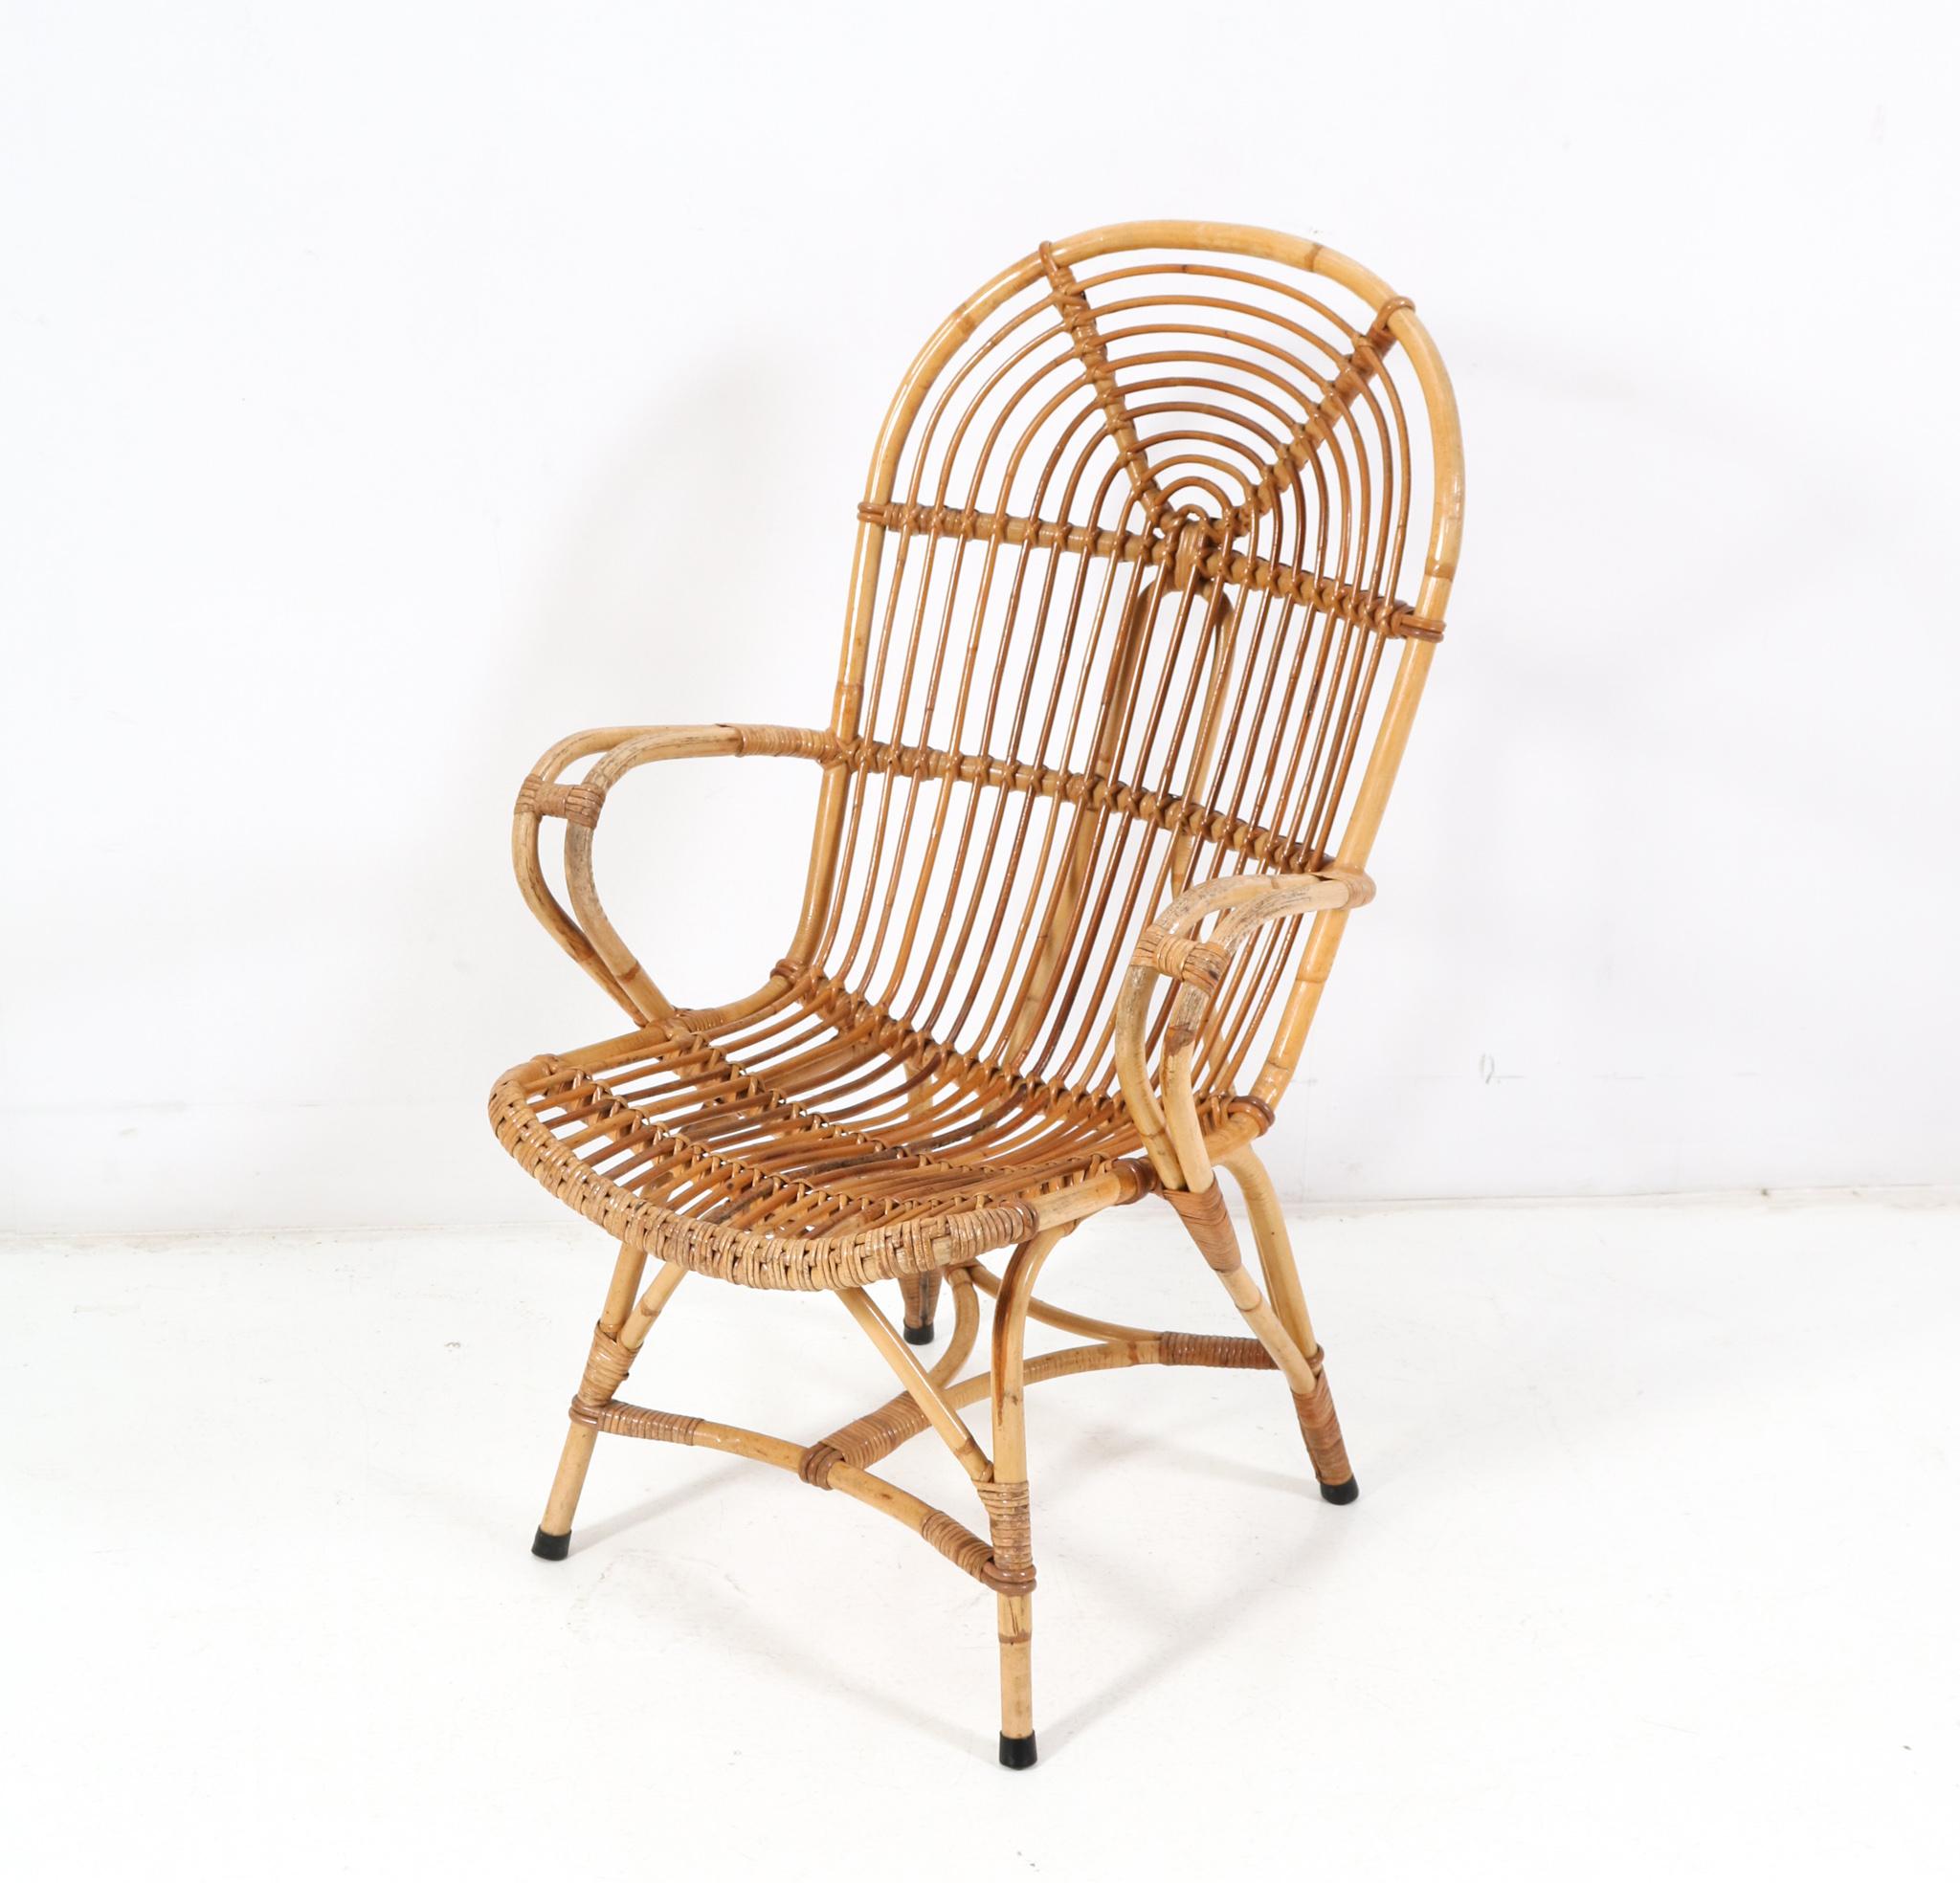 Amazing and rare Mid-Century Modern lounge chair.
Design in the style of Franco Albini.
Striking Italian design from the 1960s.
Rattan and natural bamboo frame.
The sheepskin rug is for decoration, so not for sale!
This wonderful Mid-Century Modern